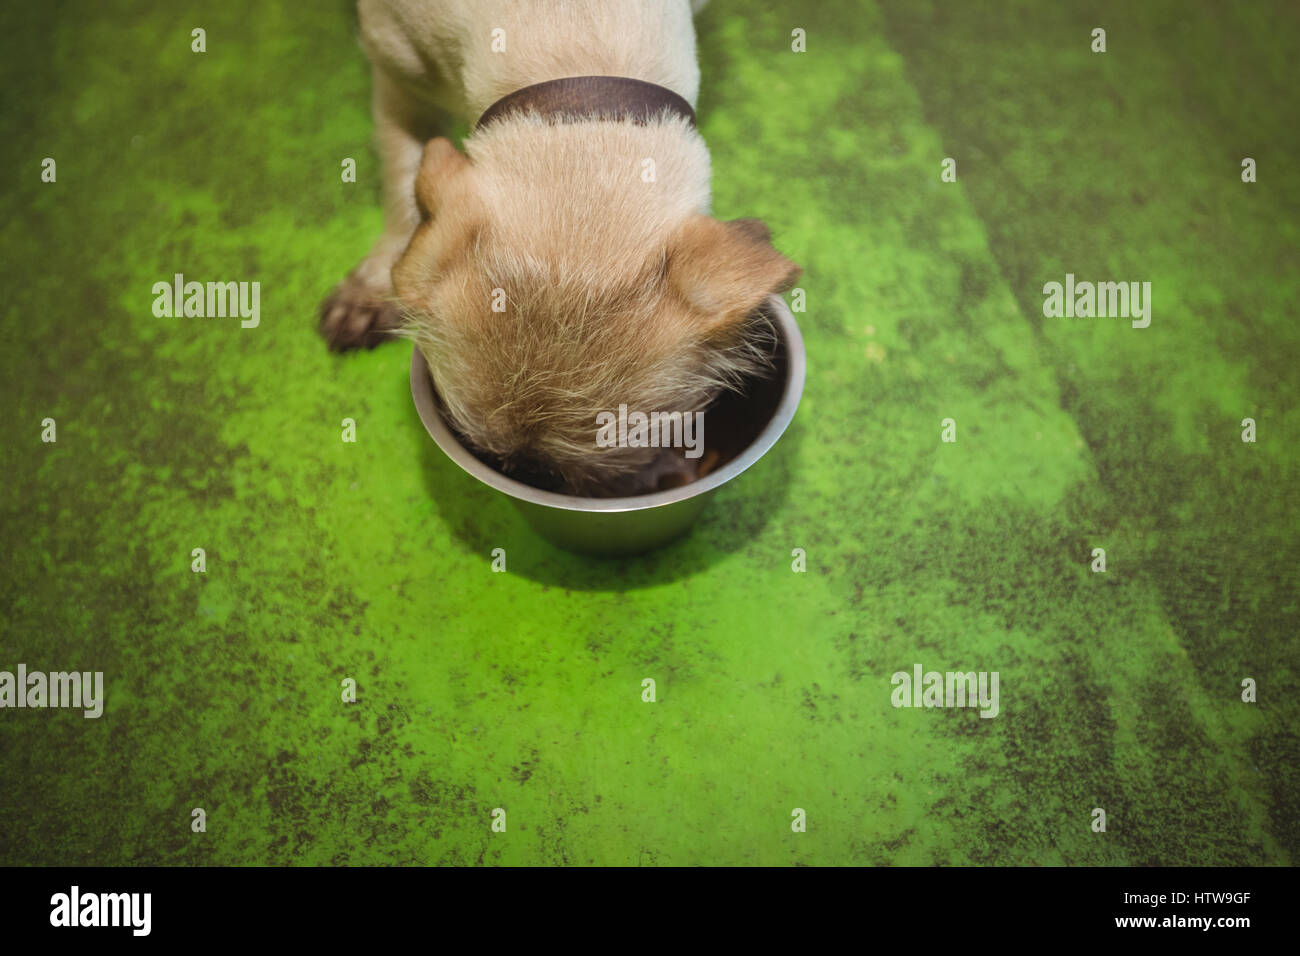 Puppy eating from dog bowl Stock Photo